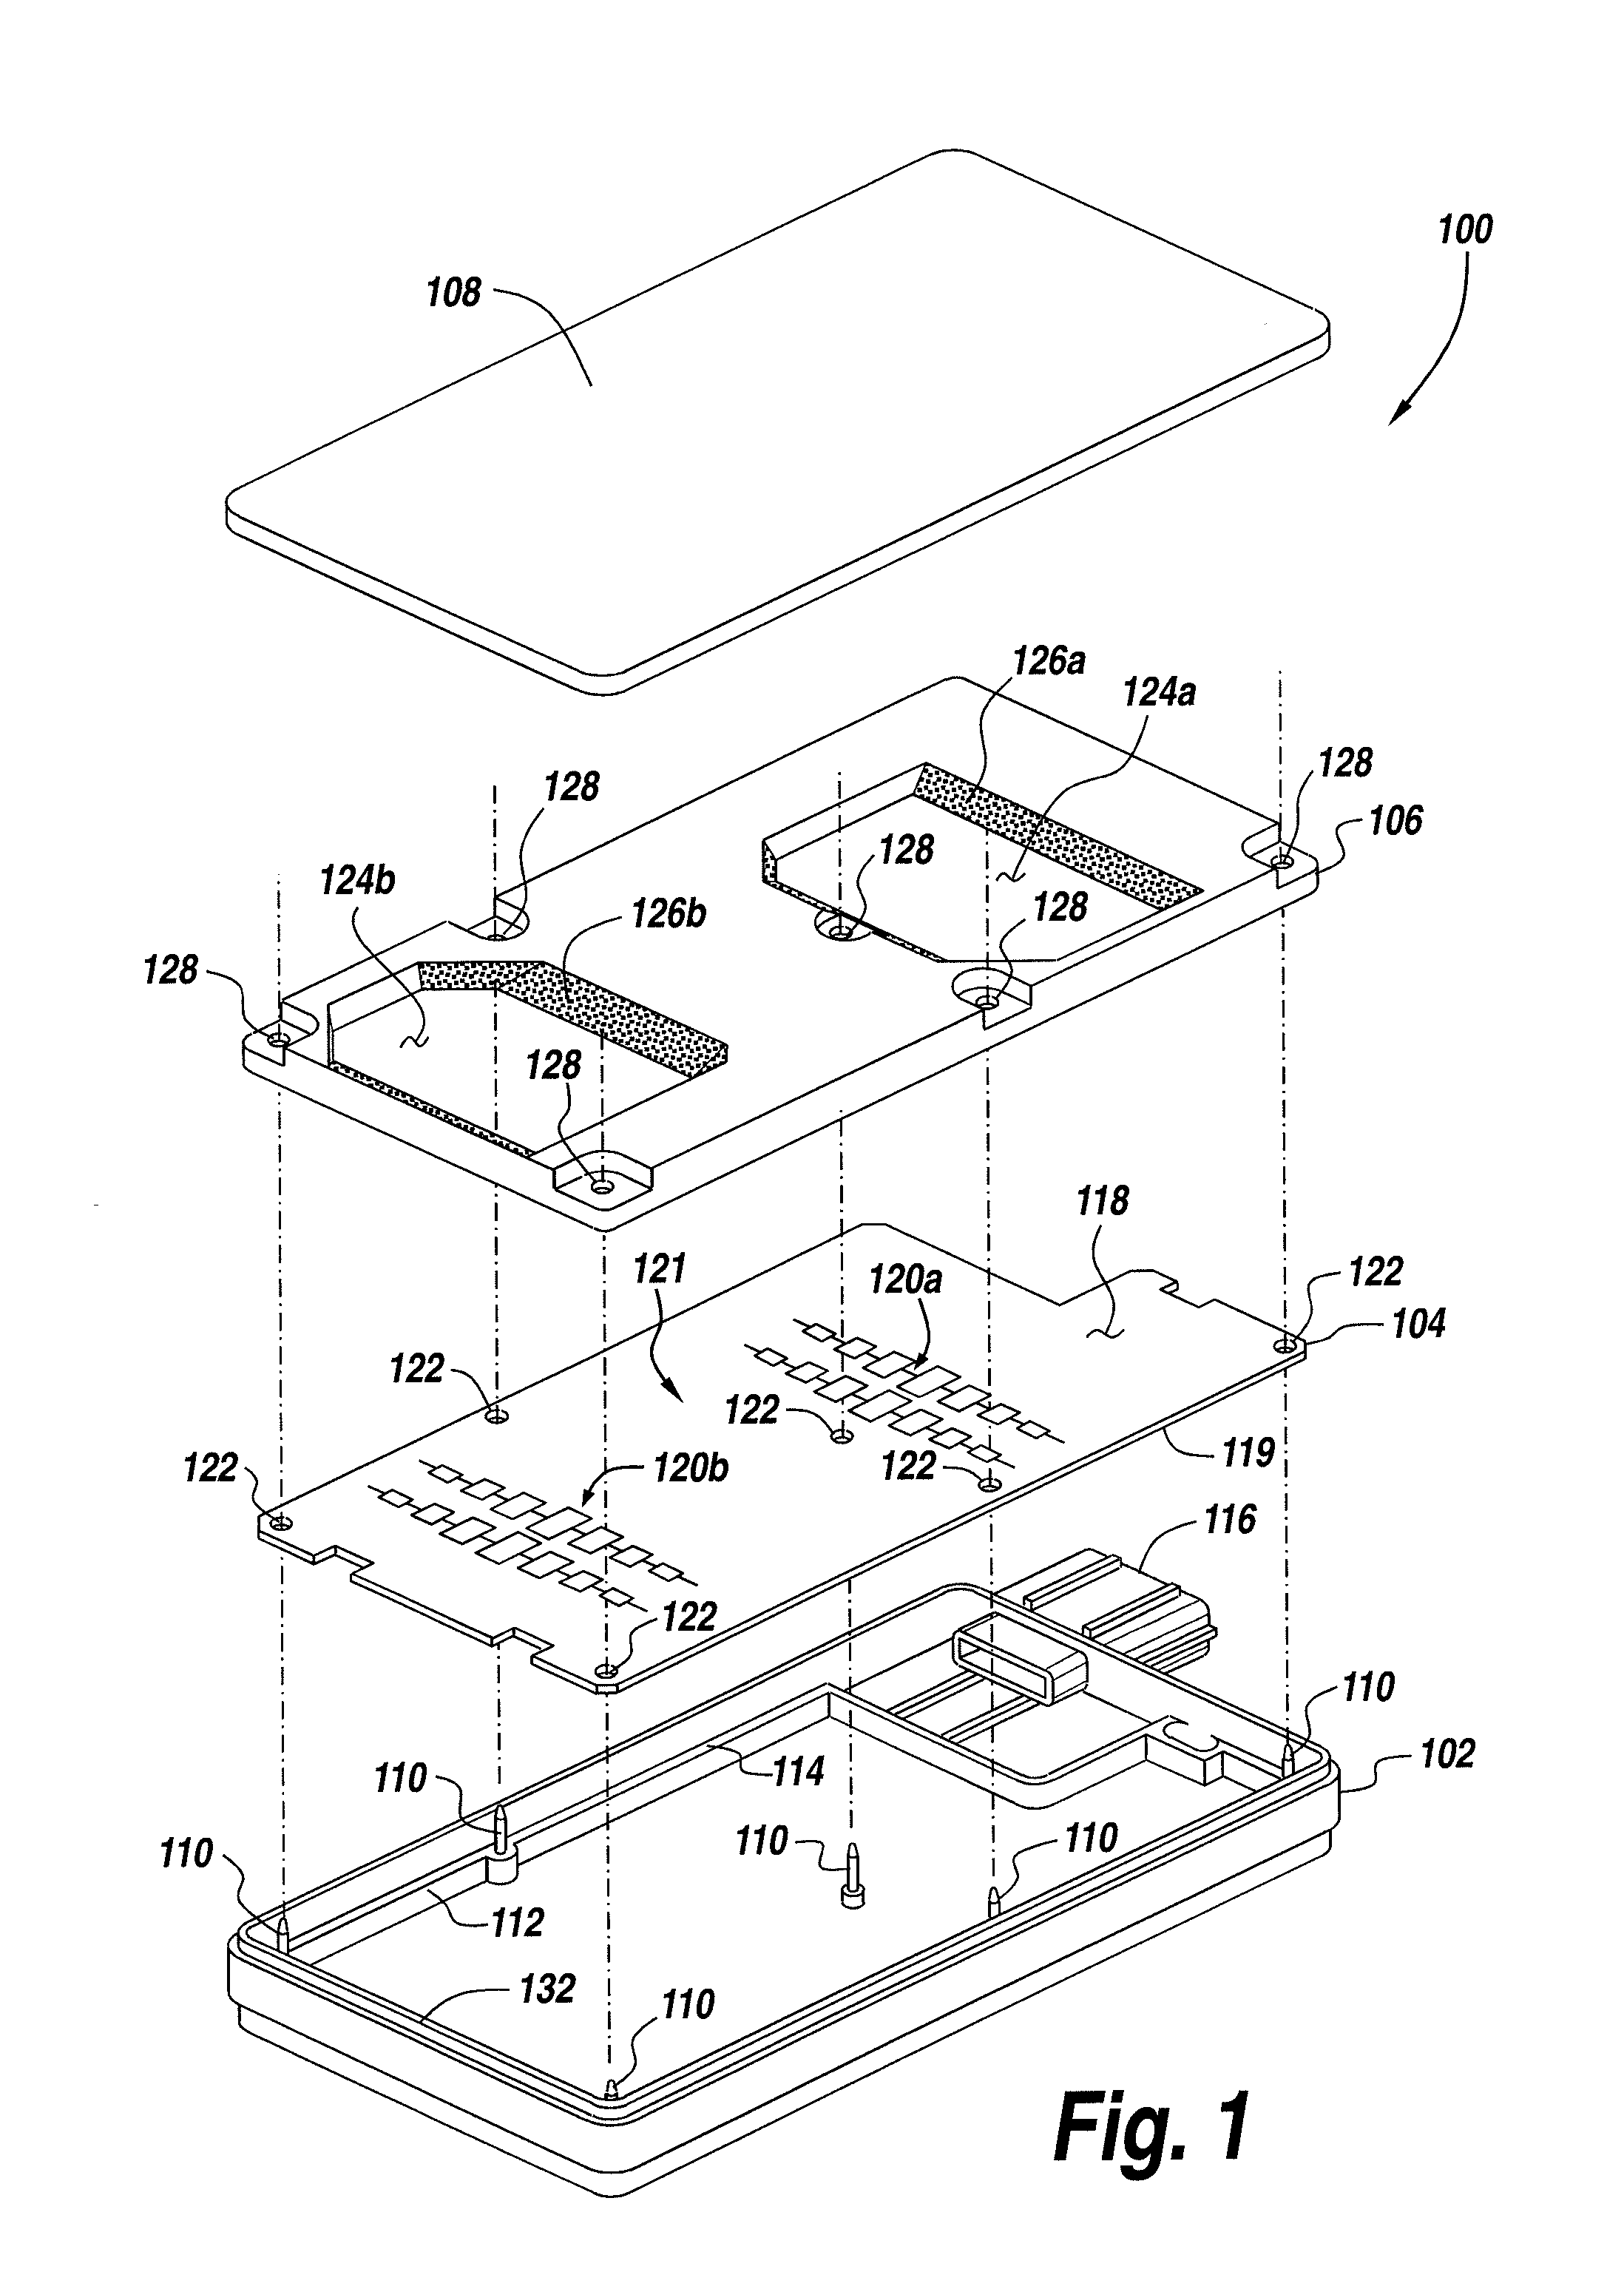 Apparatus and method for mitigating multipath effects and improving absorption of an automotive radar module